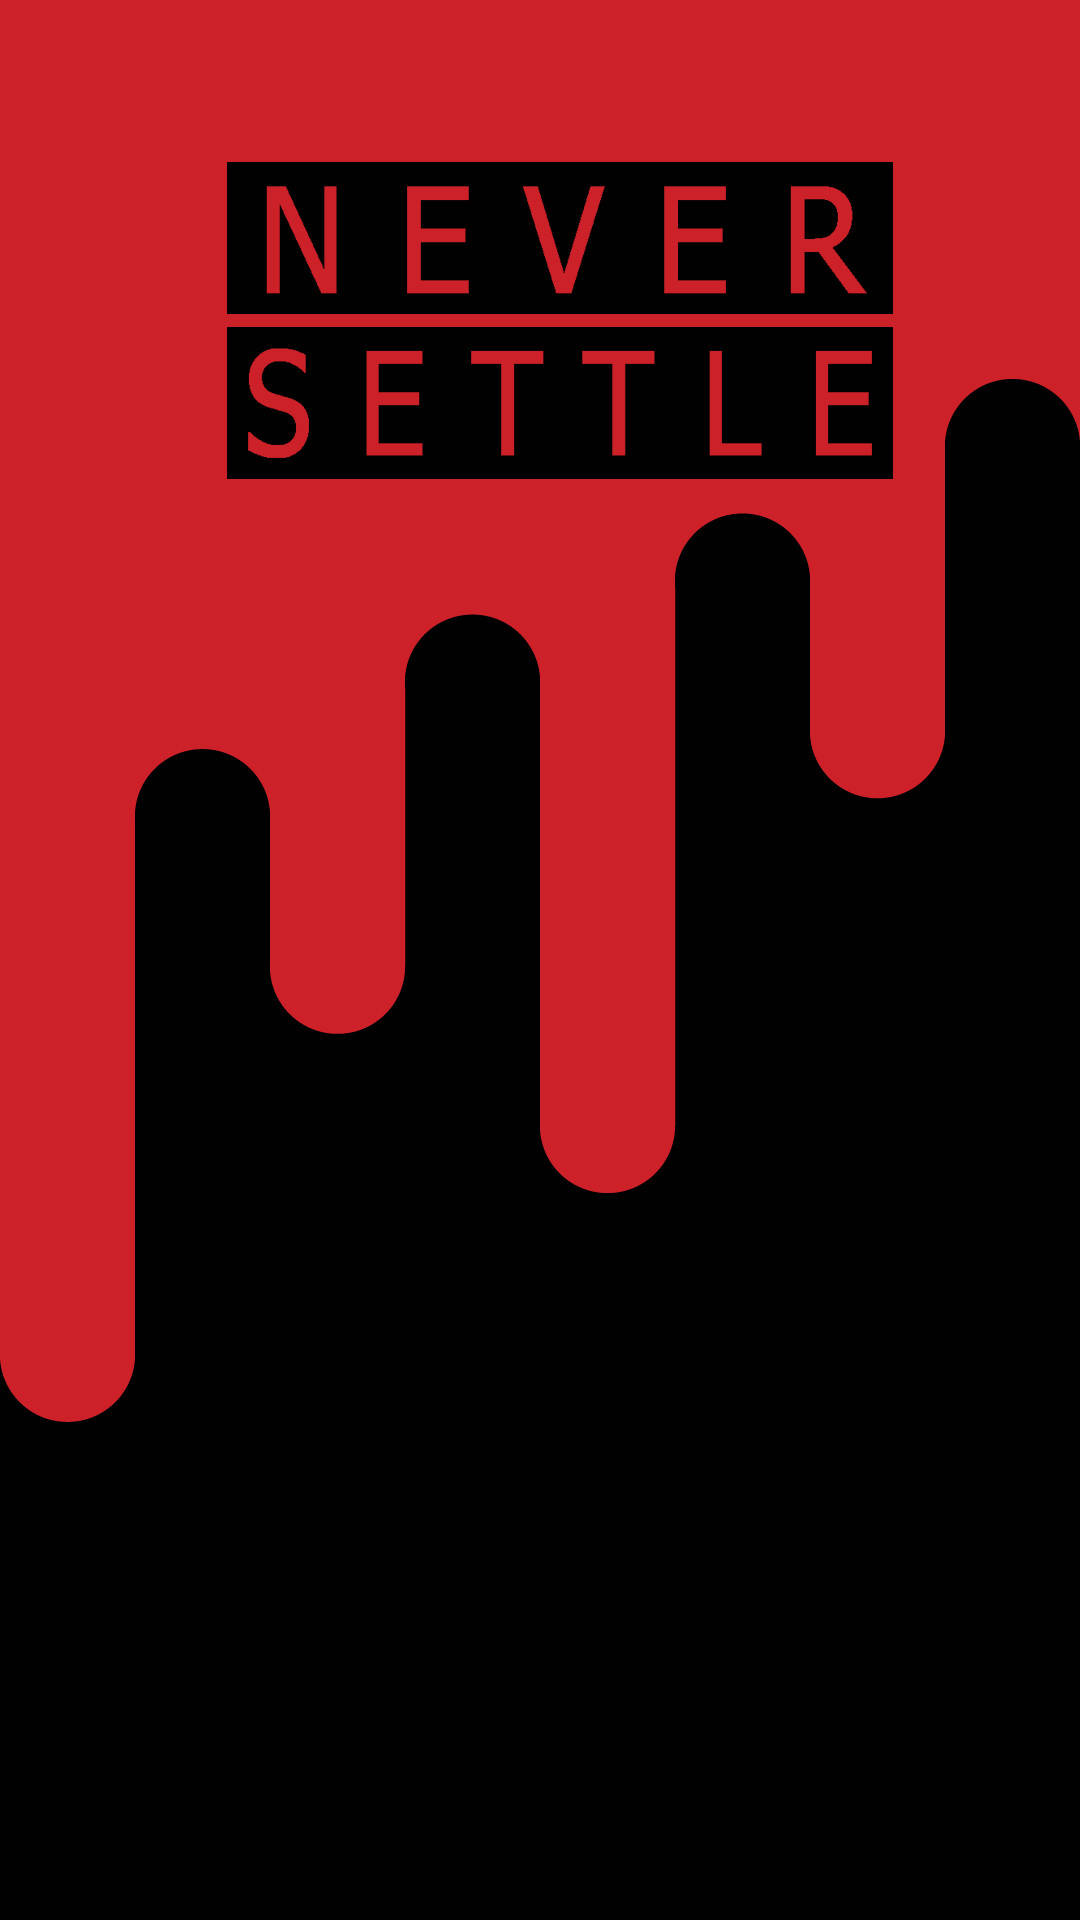 Download Oneplus Never Settle Dripping Wallpaper 